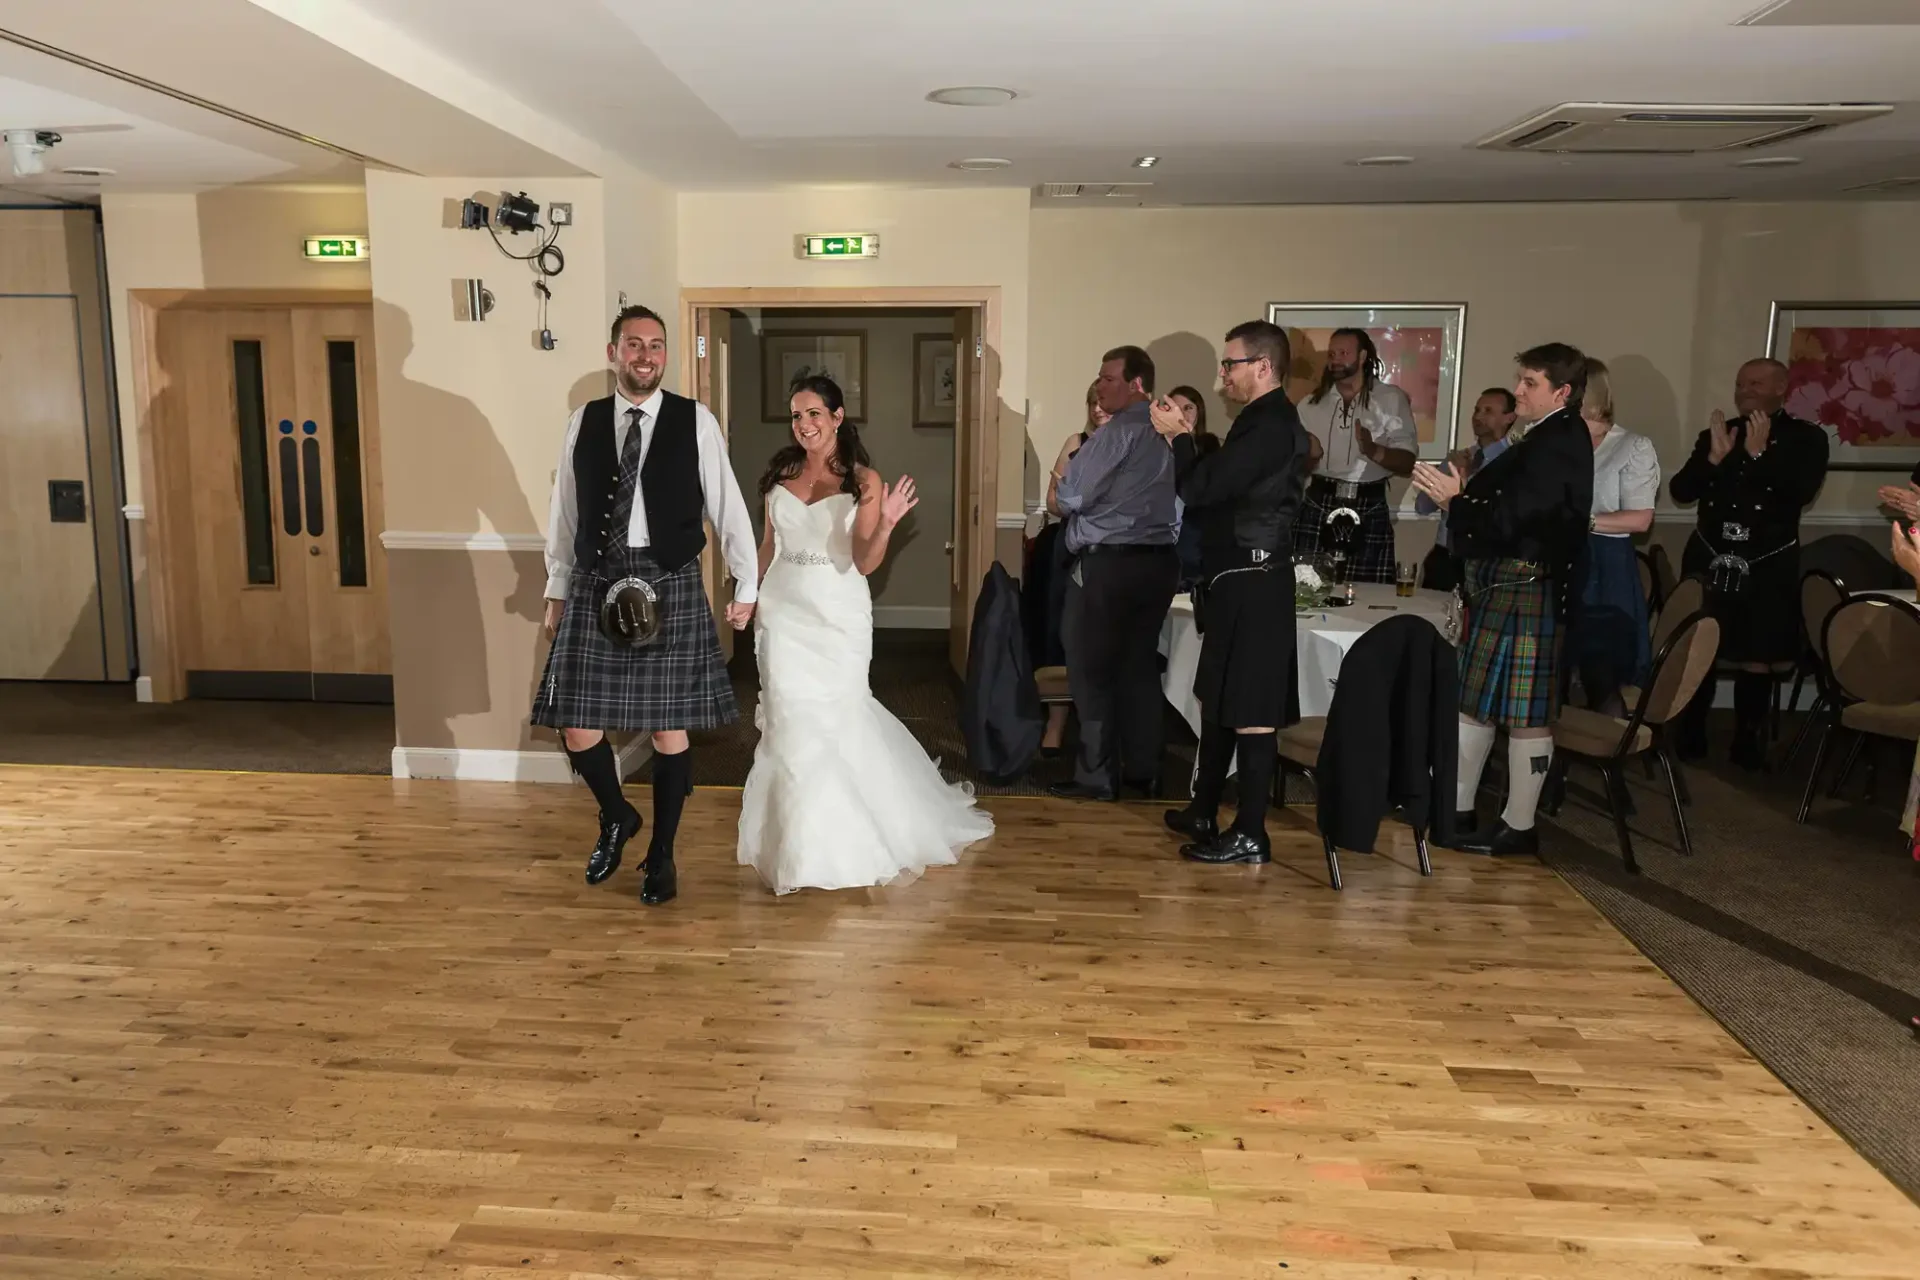 A bride and groom, the groom wearing a kilt, joyfully enter a reception hall with guests clapping around them.